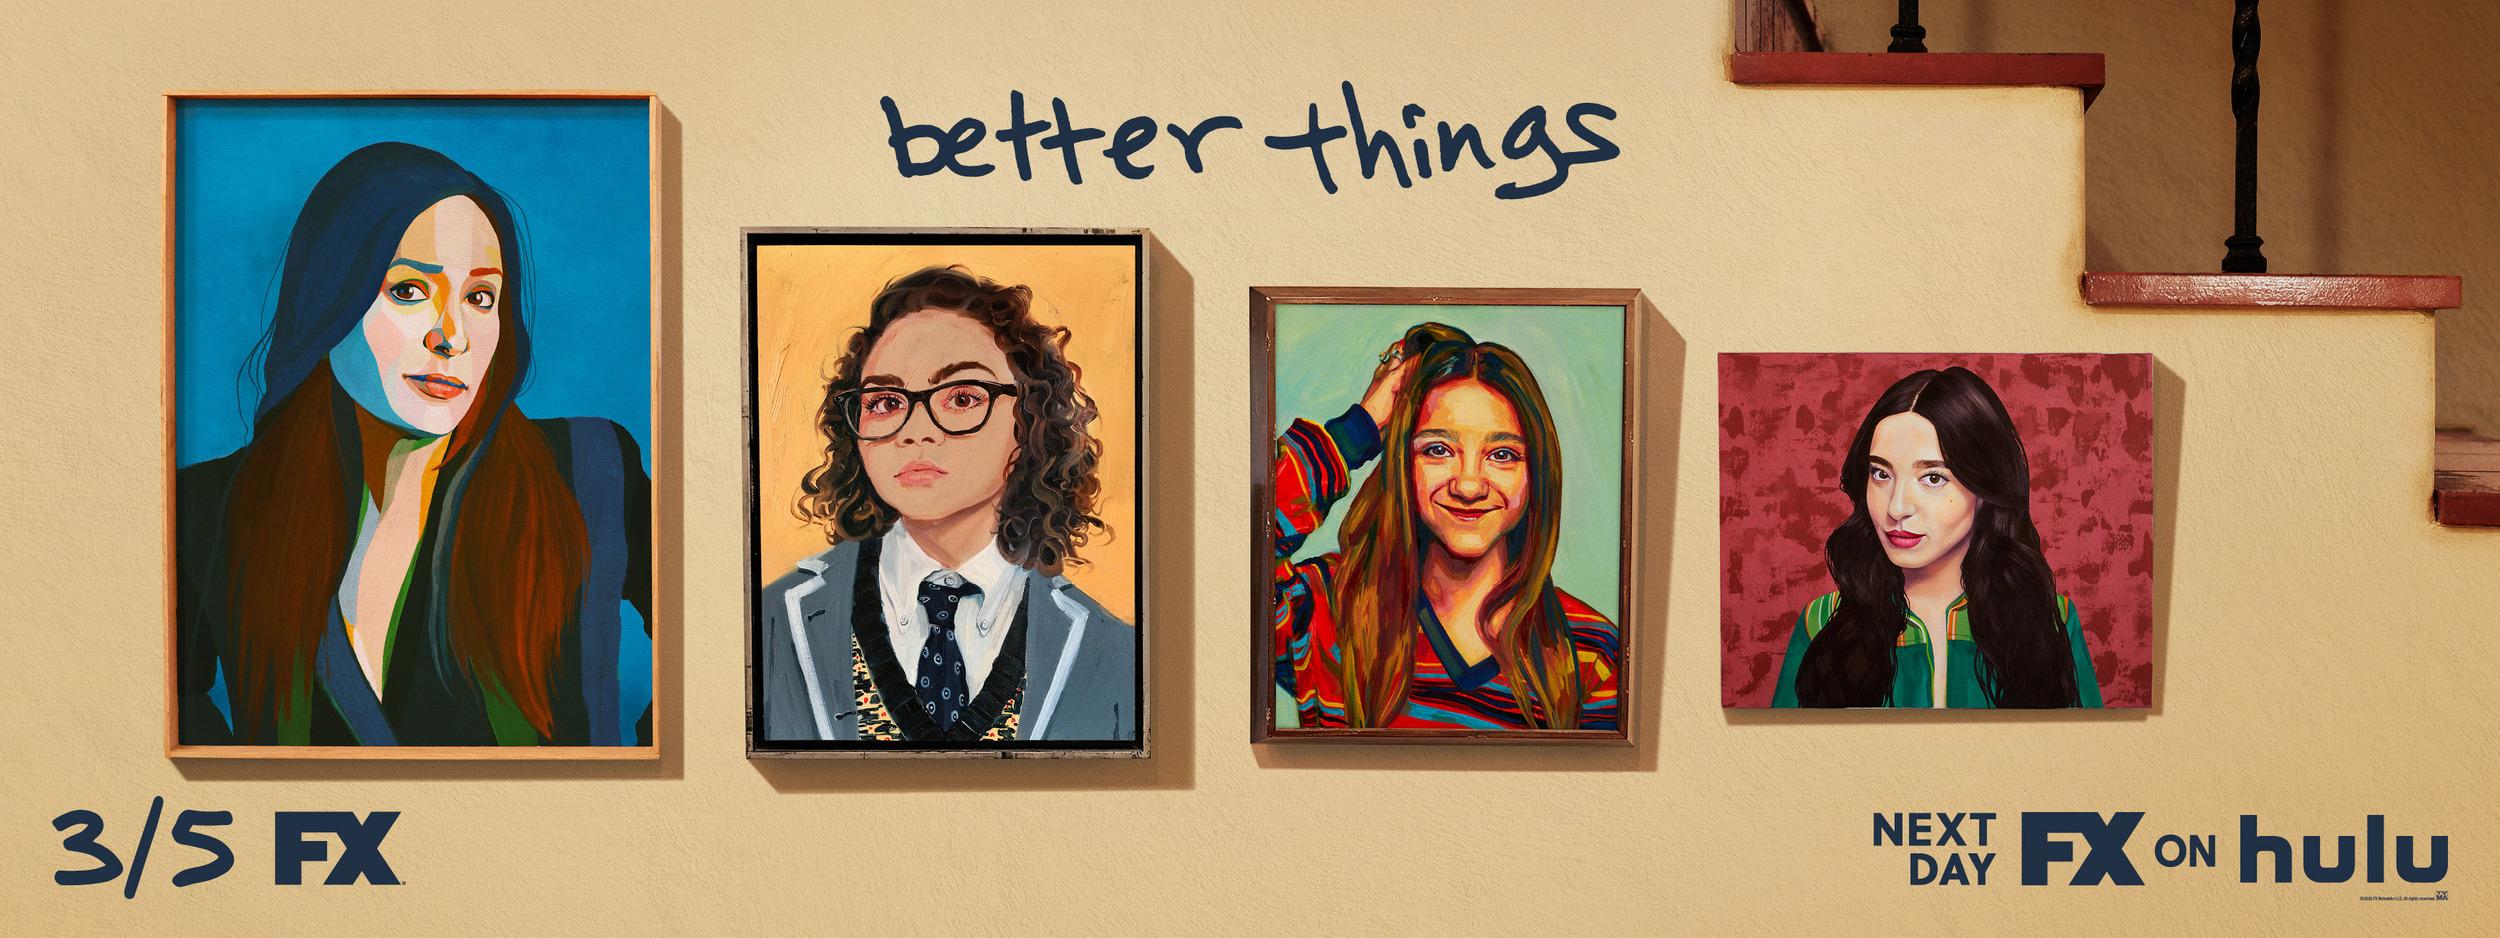 Mega Sized Movie Poster Image for Better Things (#8 of 11)